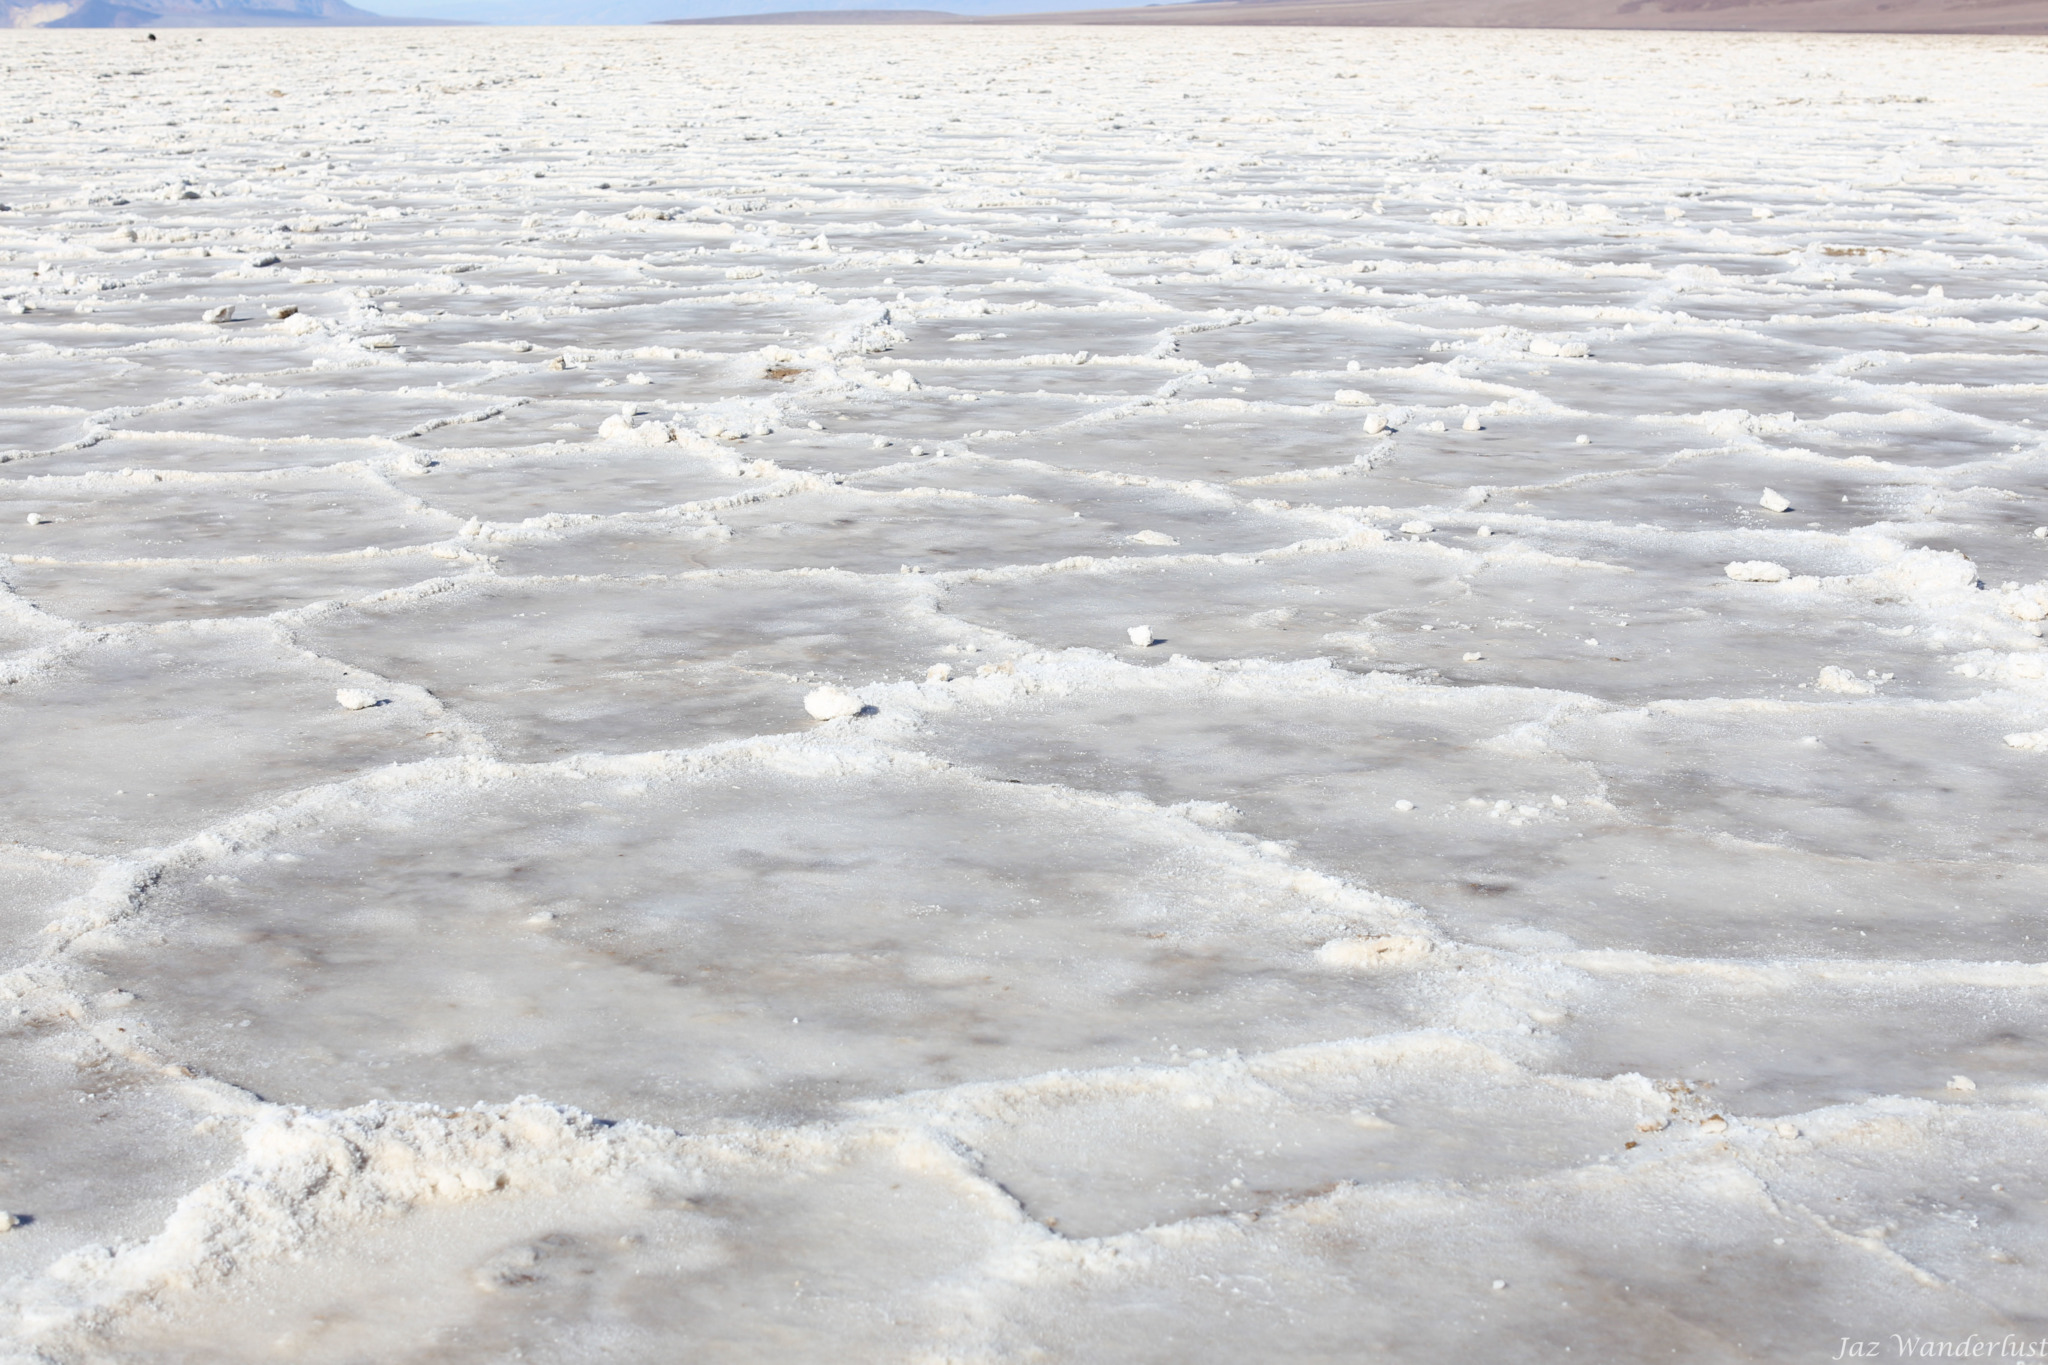 Death Valley National Park landscape at Badwater Basin. Photography by Jaz Wanderlust.